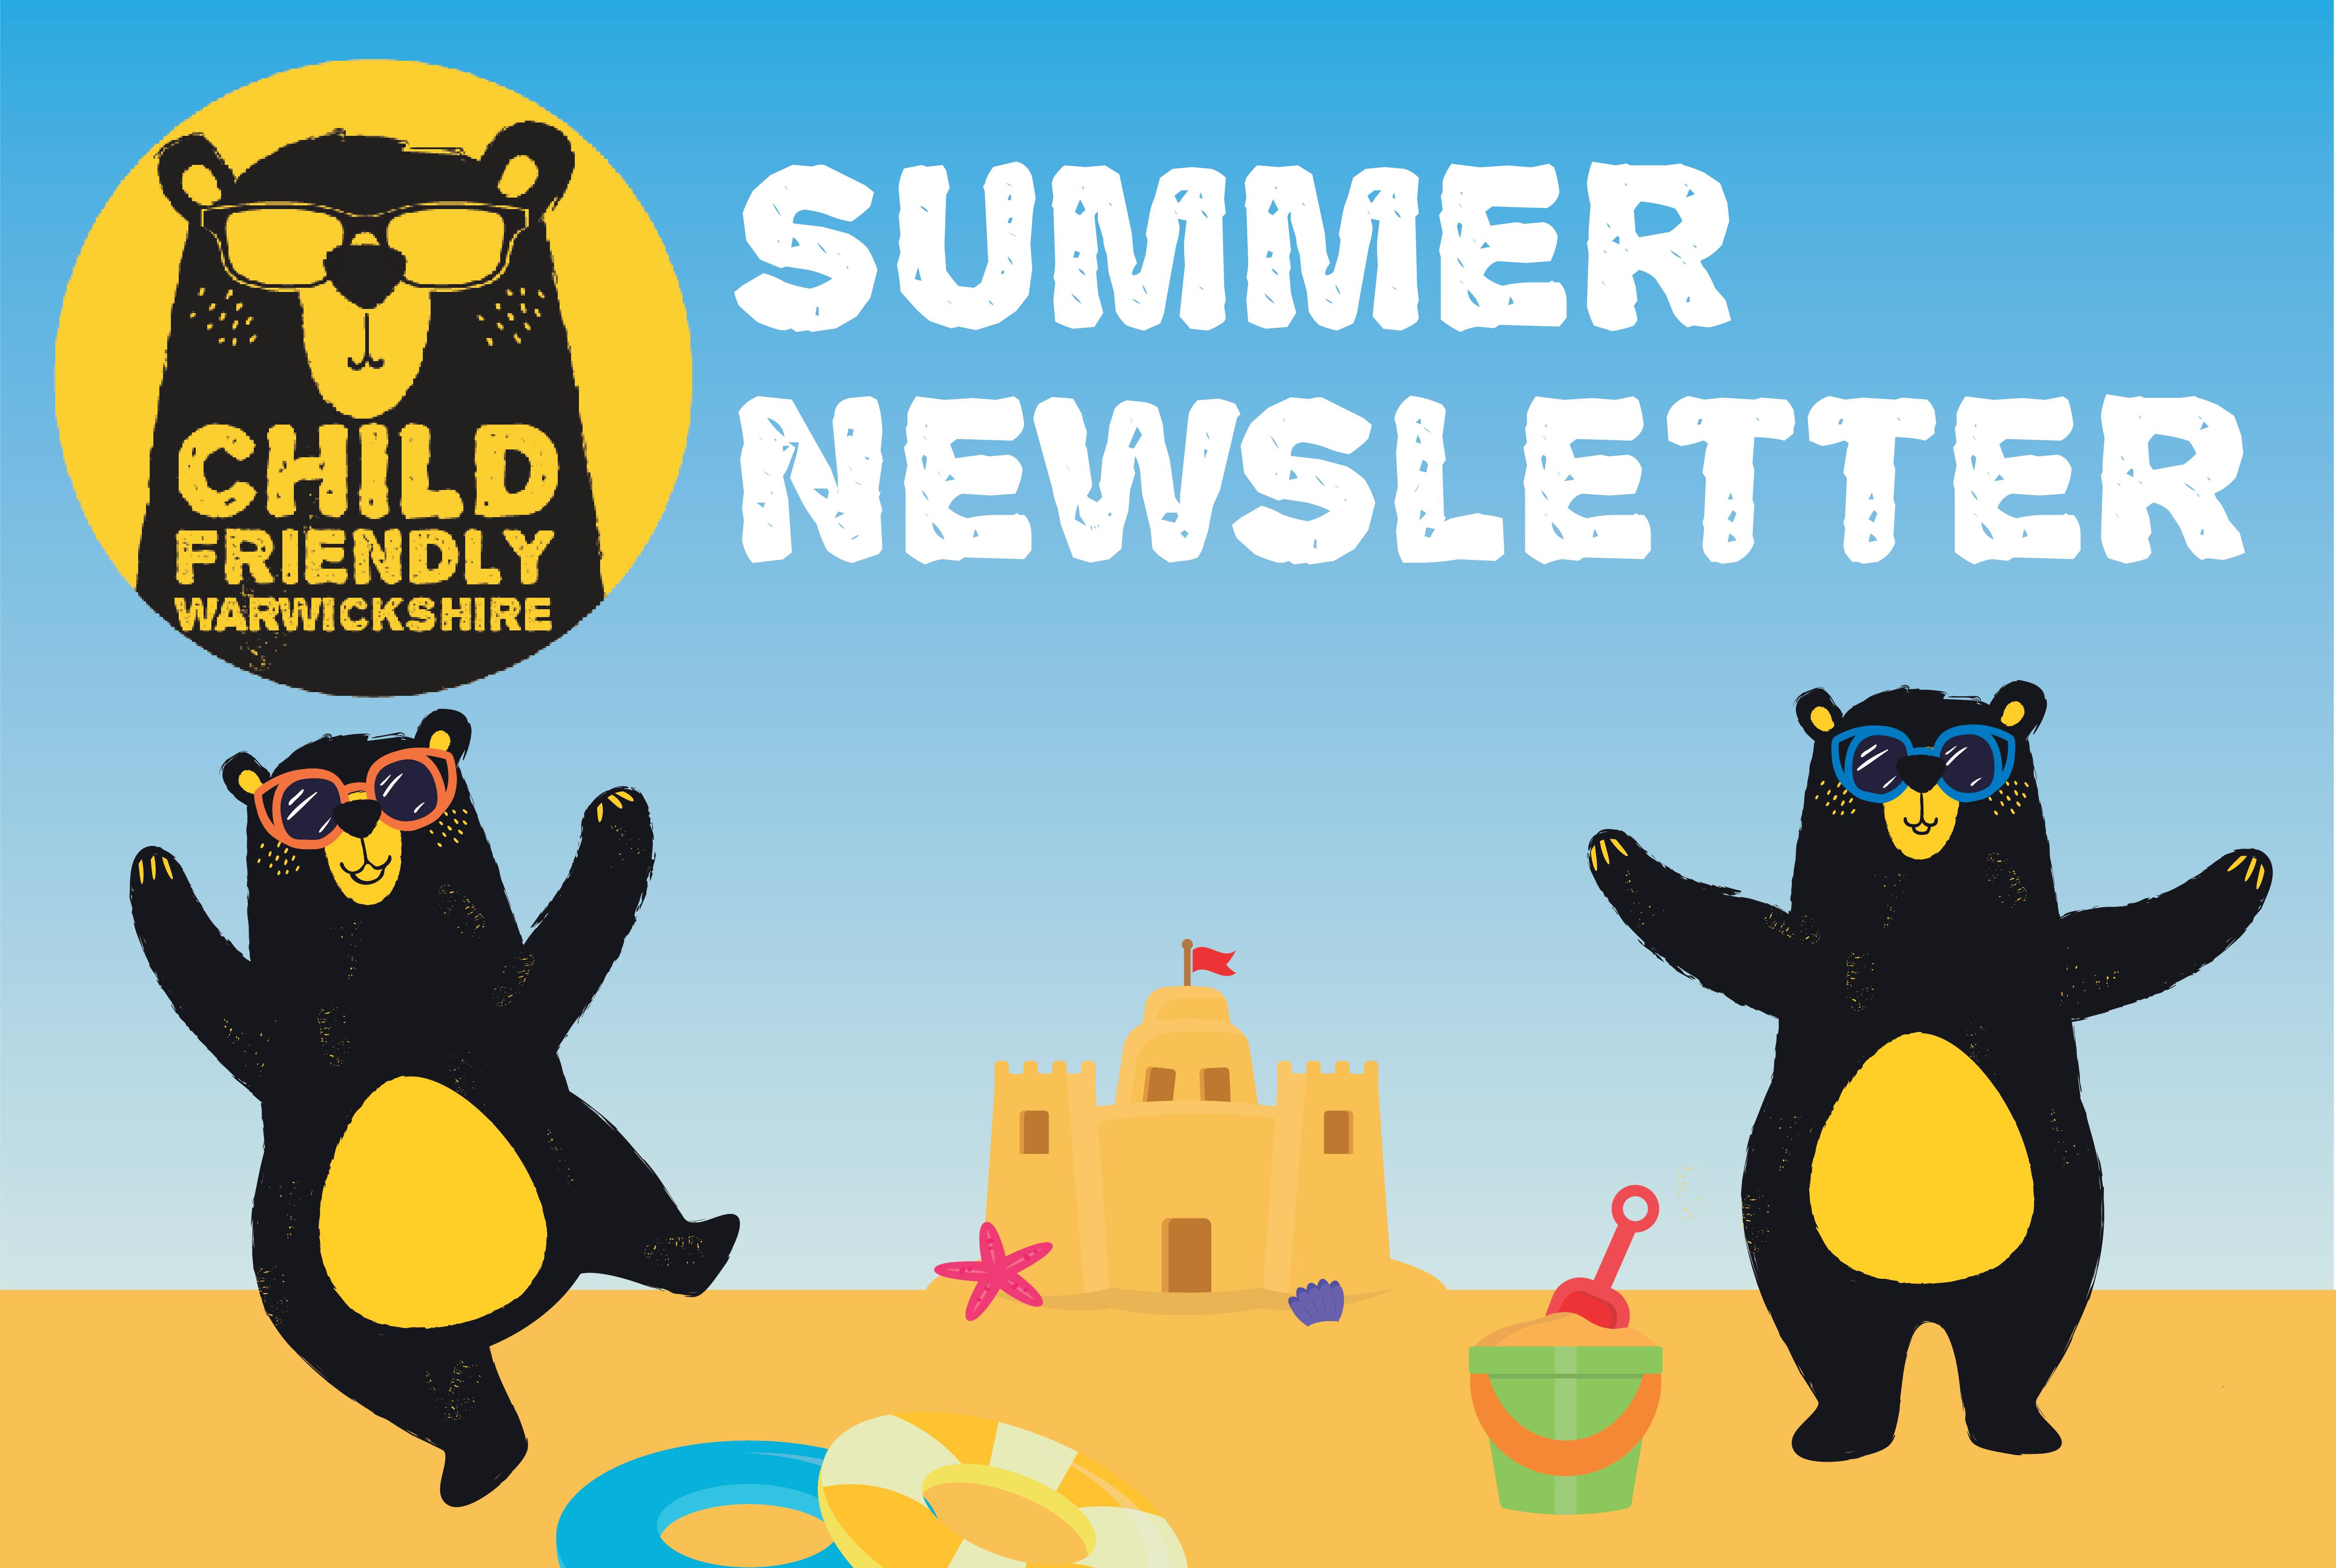 2 bears playing with a sandcastle under the heading Summer Newsletter with the CFW logo in the top left corner